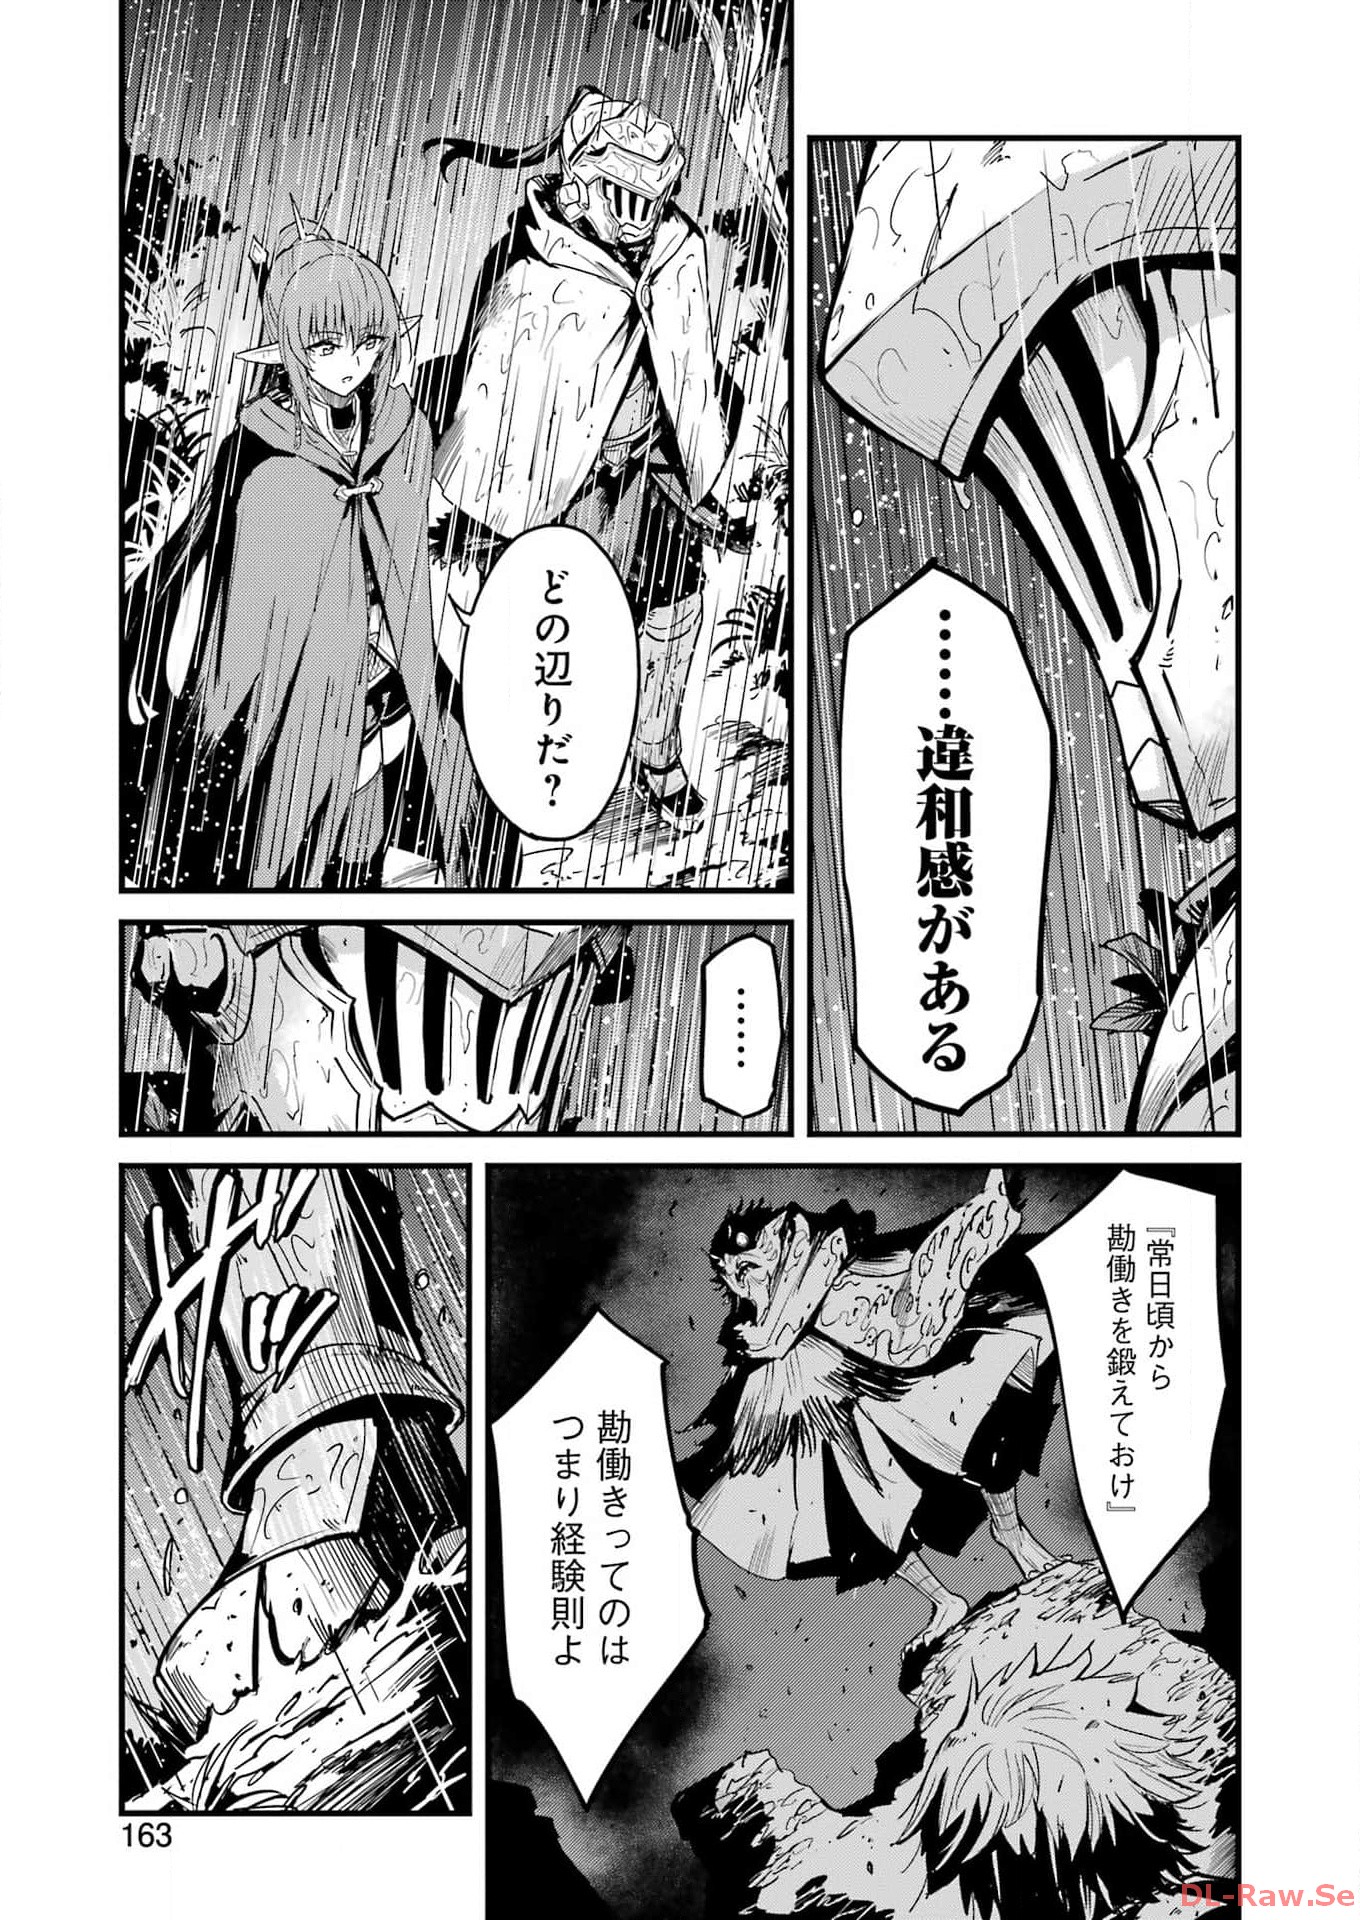 Goblin Slayer: Side Story Year One - Chapter 97 - Page 5